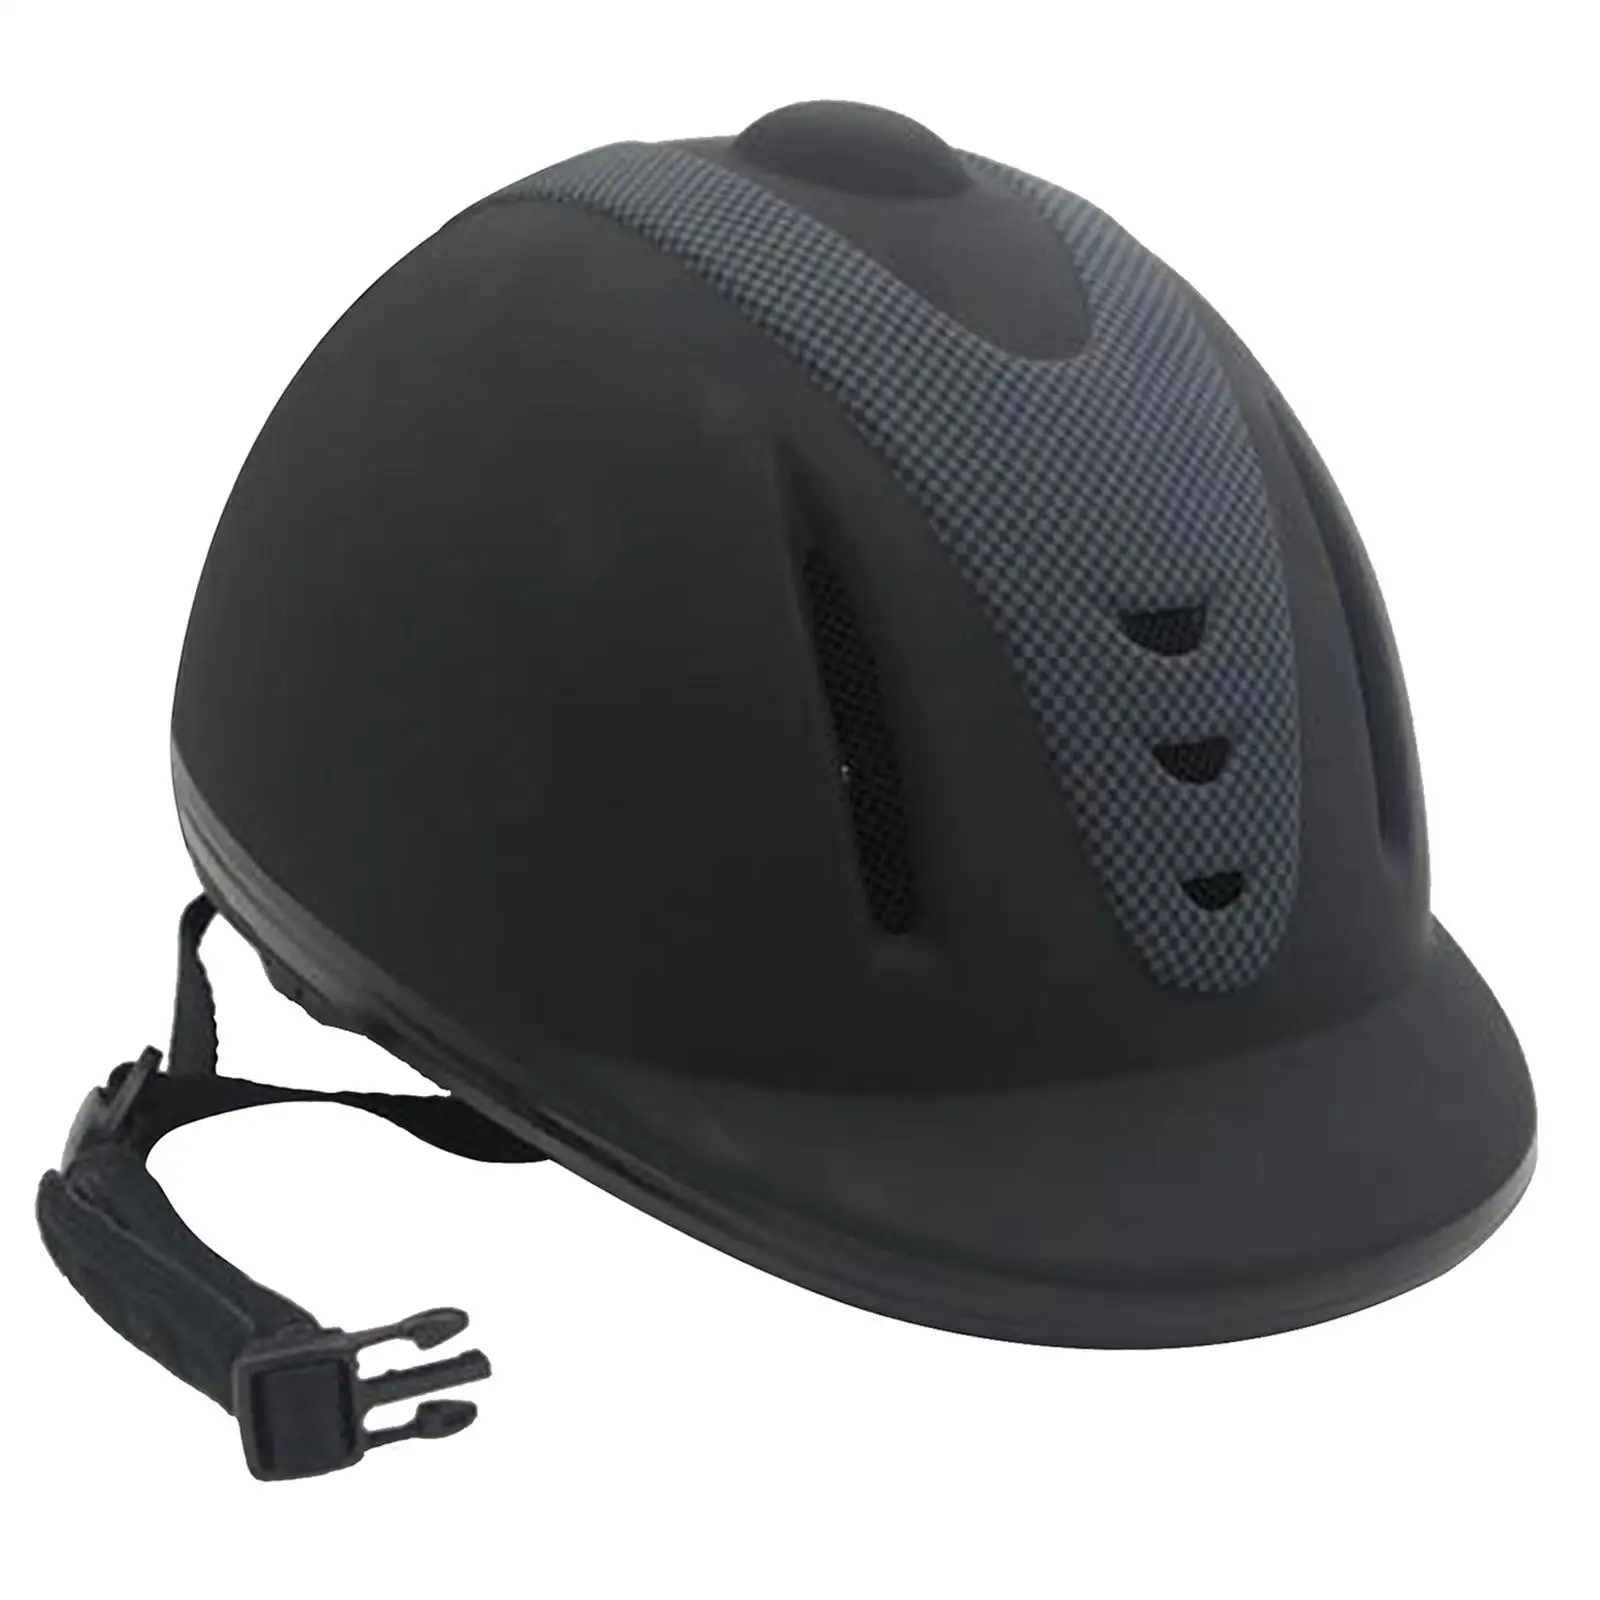 Horse Riding Helmet Cap Adjustable Equestrian Breathable Safety Hat for 